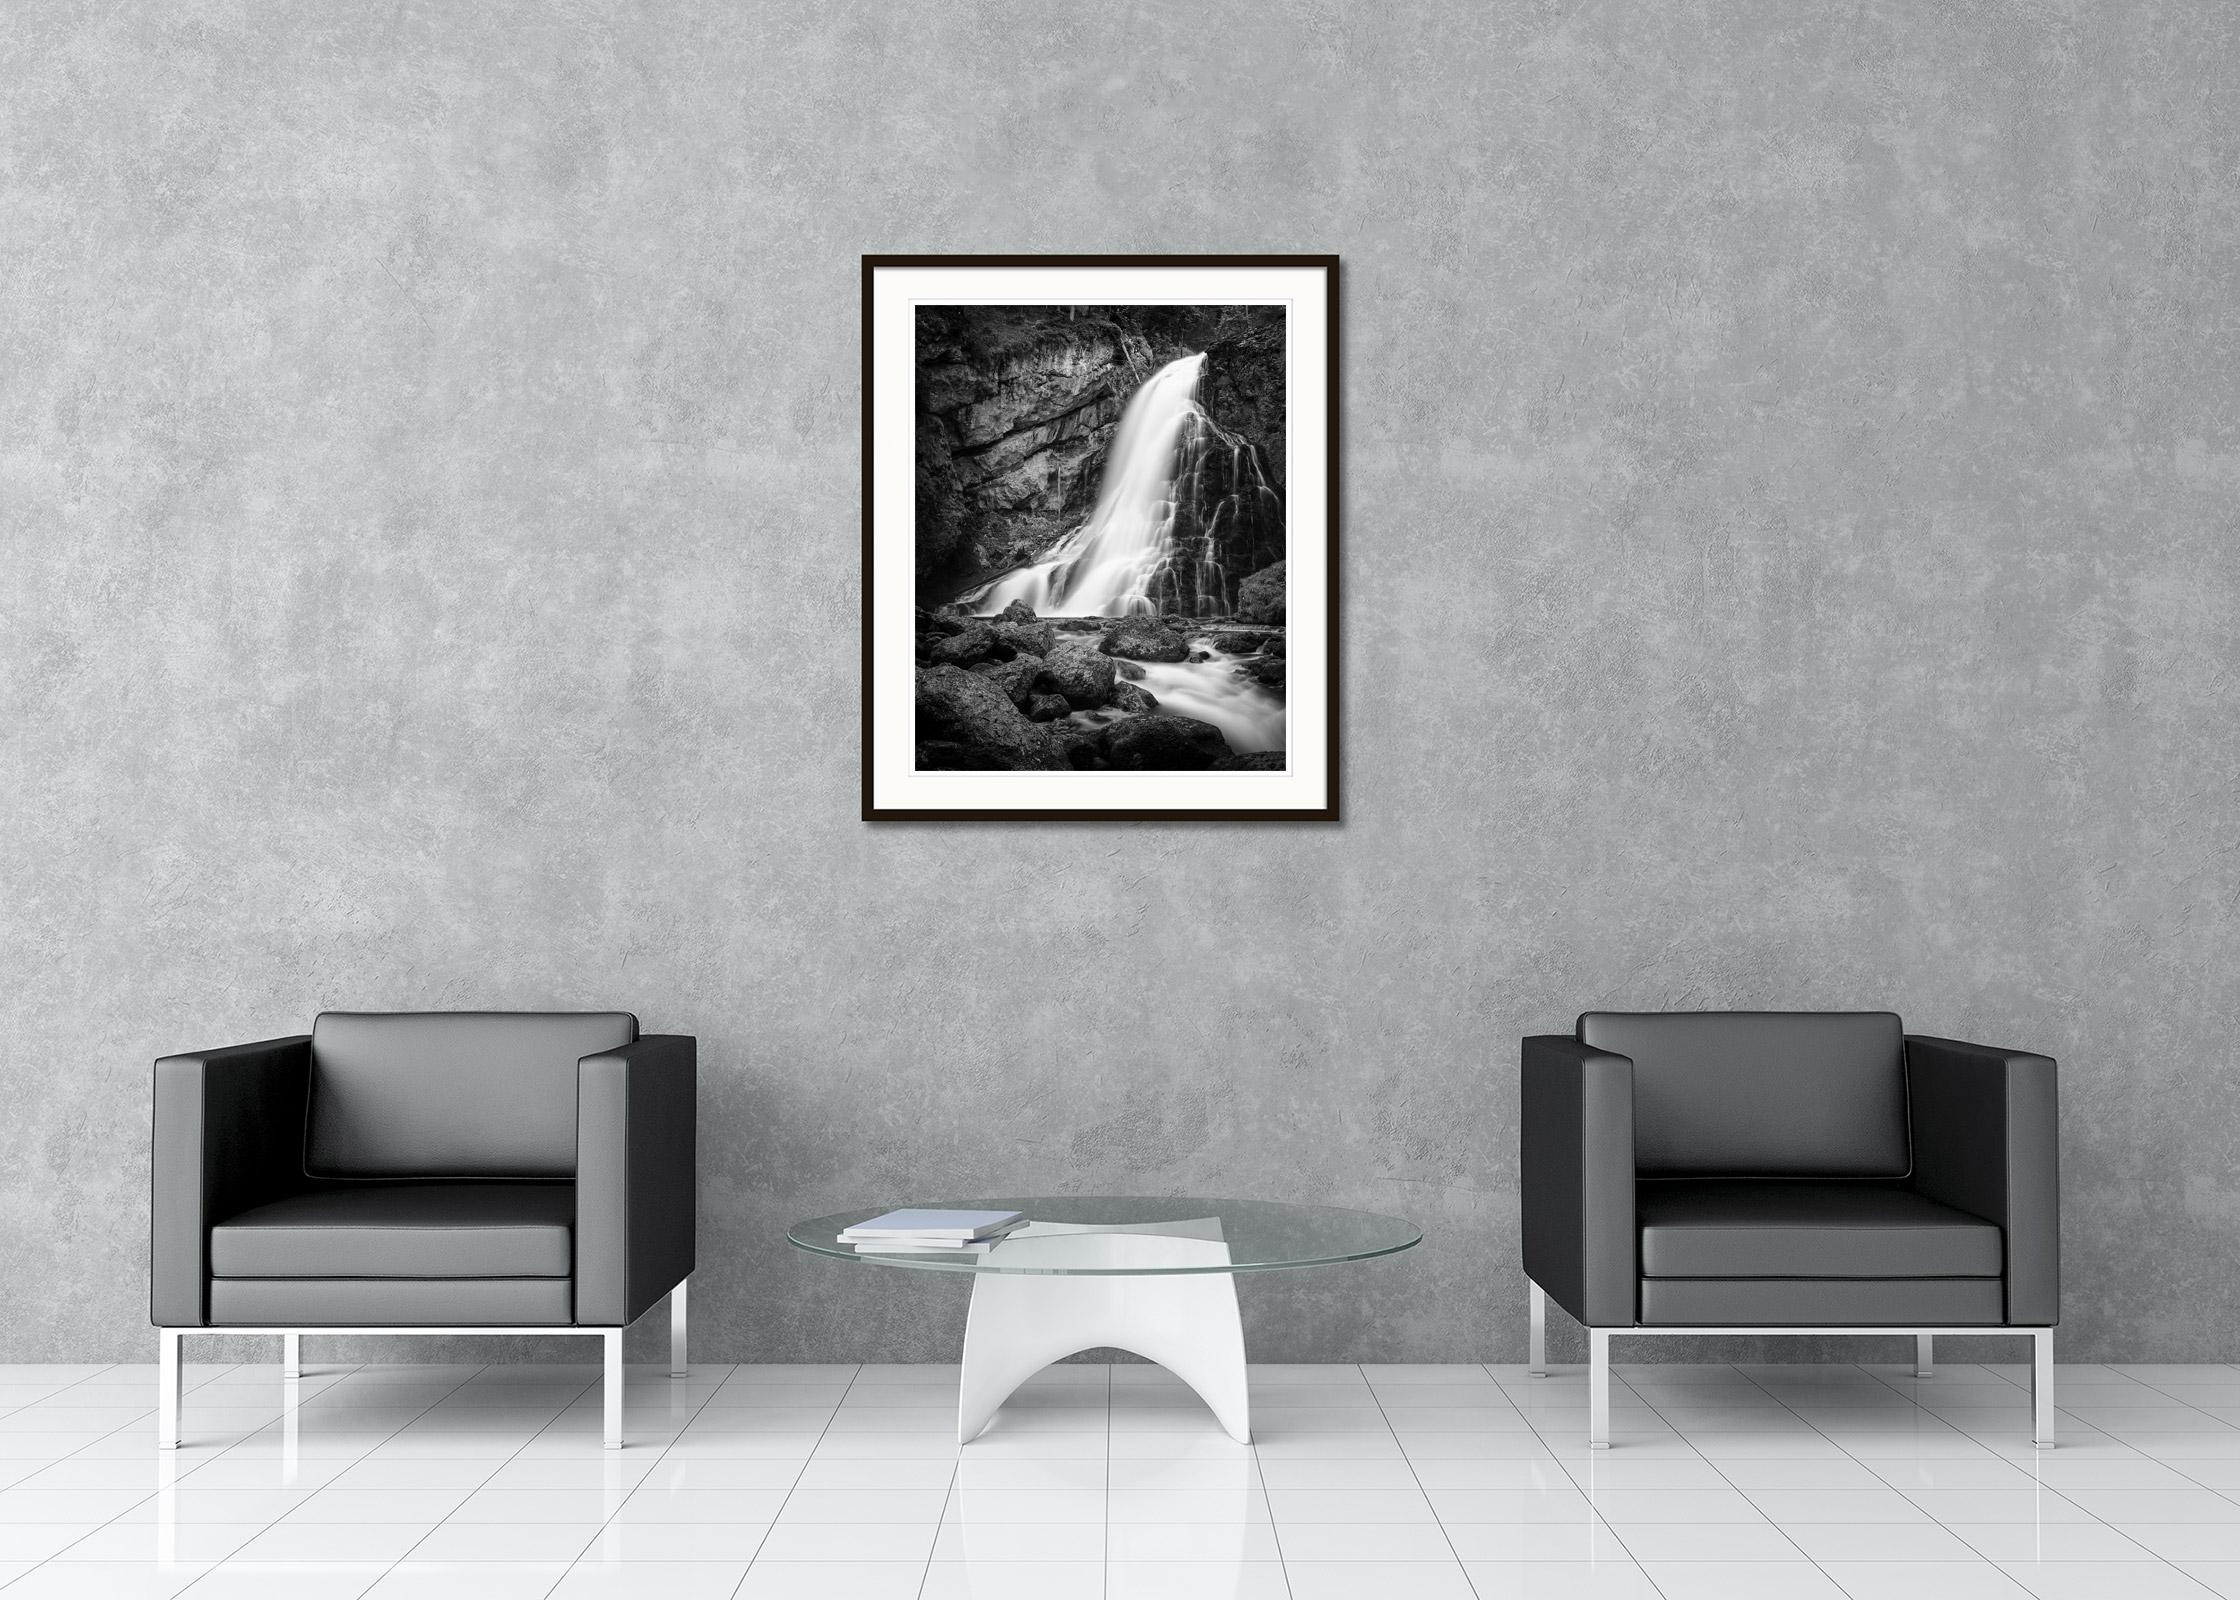 Golling Falls, Waterfall, Austria, black & white waterscape fine art photography - Black Landscape Photograph by Gerald Berghammer